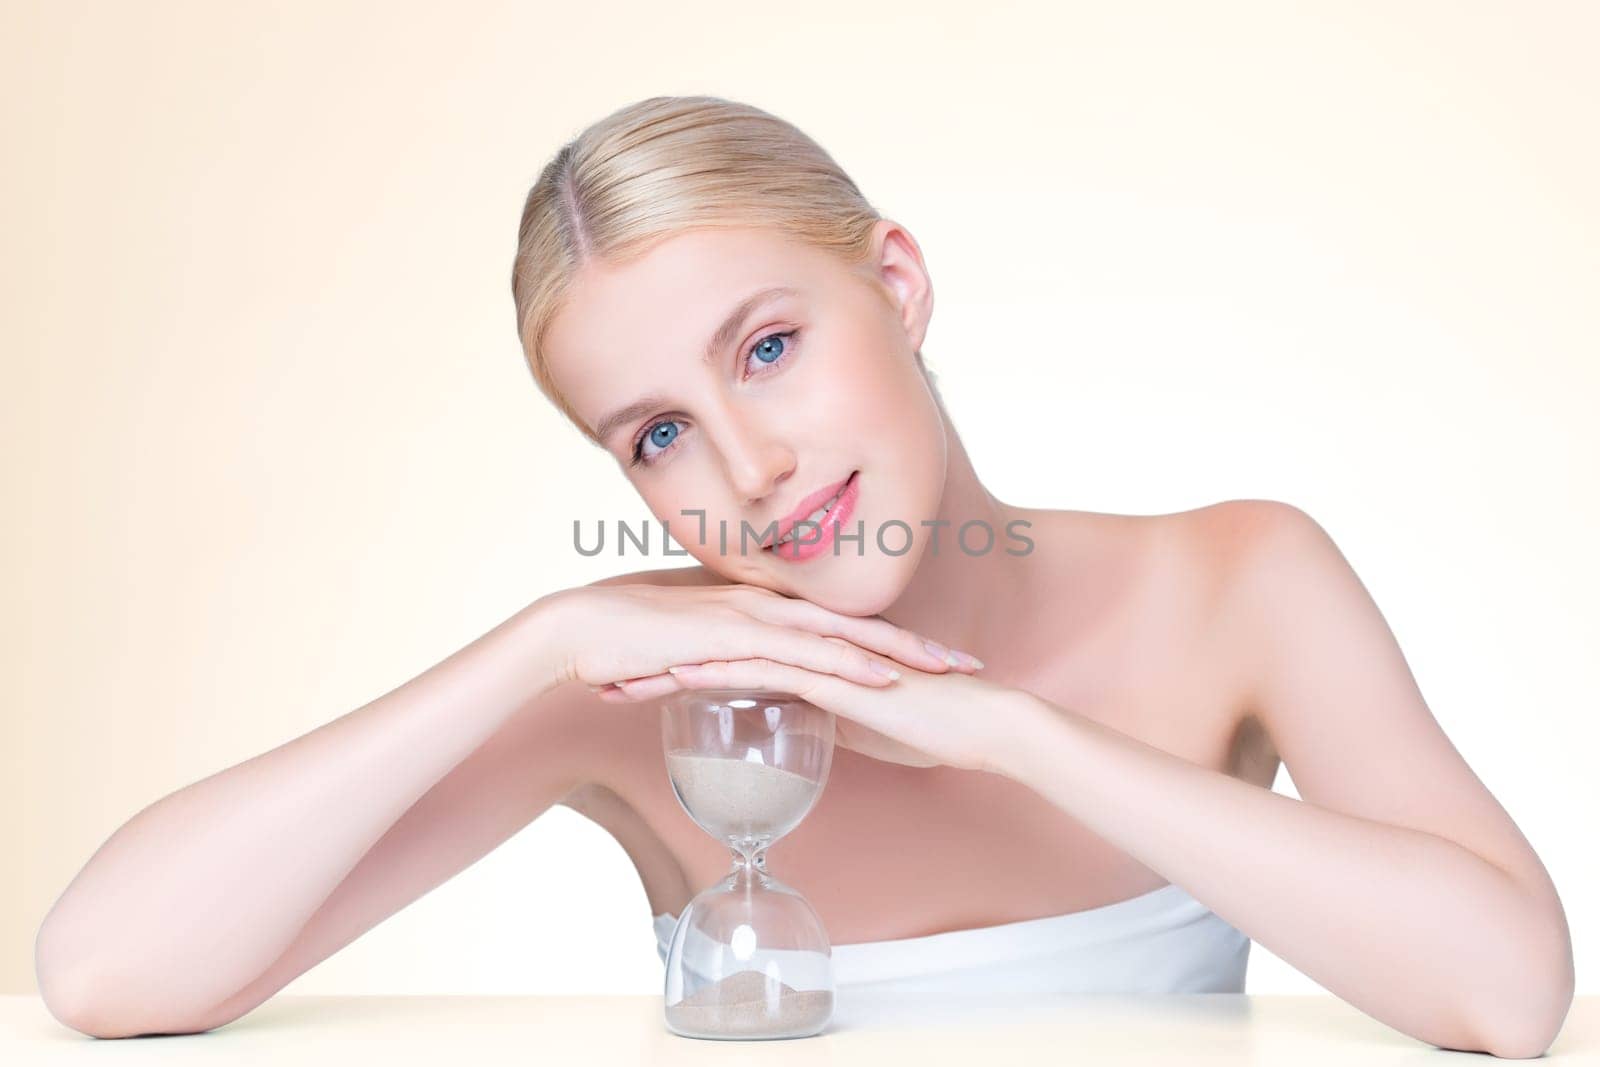 Personable model holding hourglass in beauty concept of anti-aging skincare treatment for woman. Young girl portrait with perfect smooth clean skin and flawless soft makeup in isolated background.